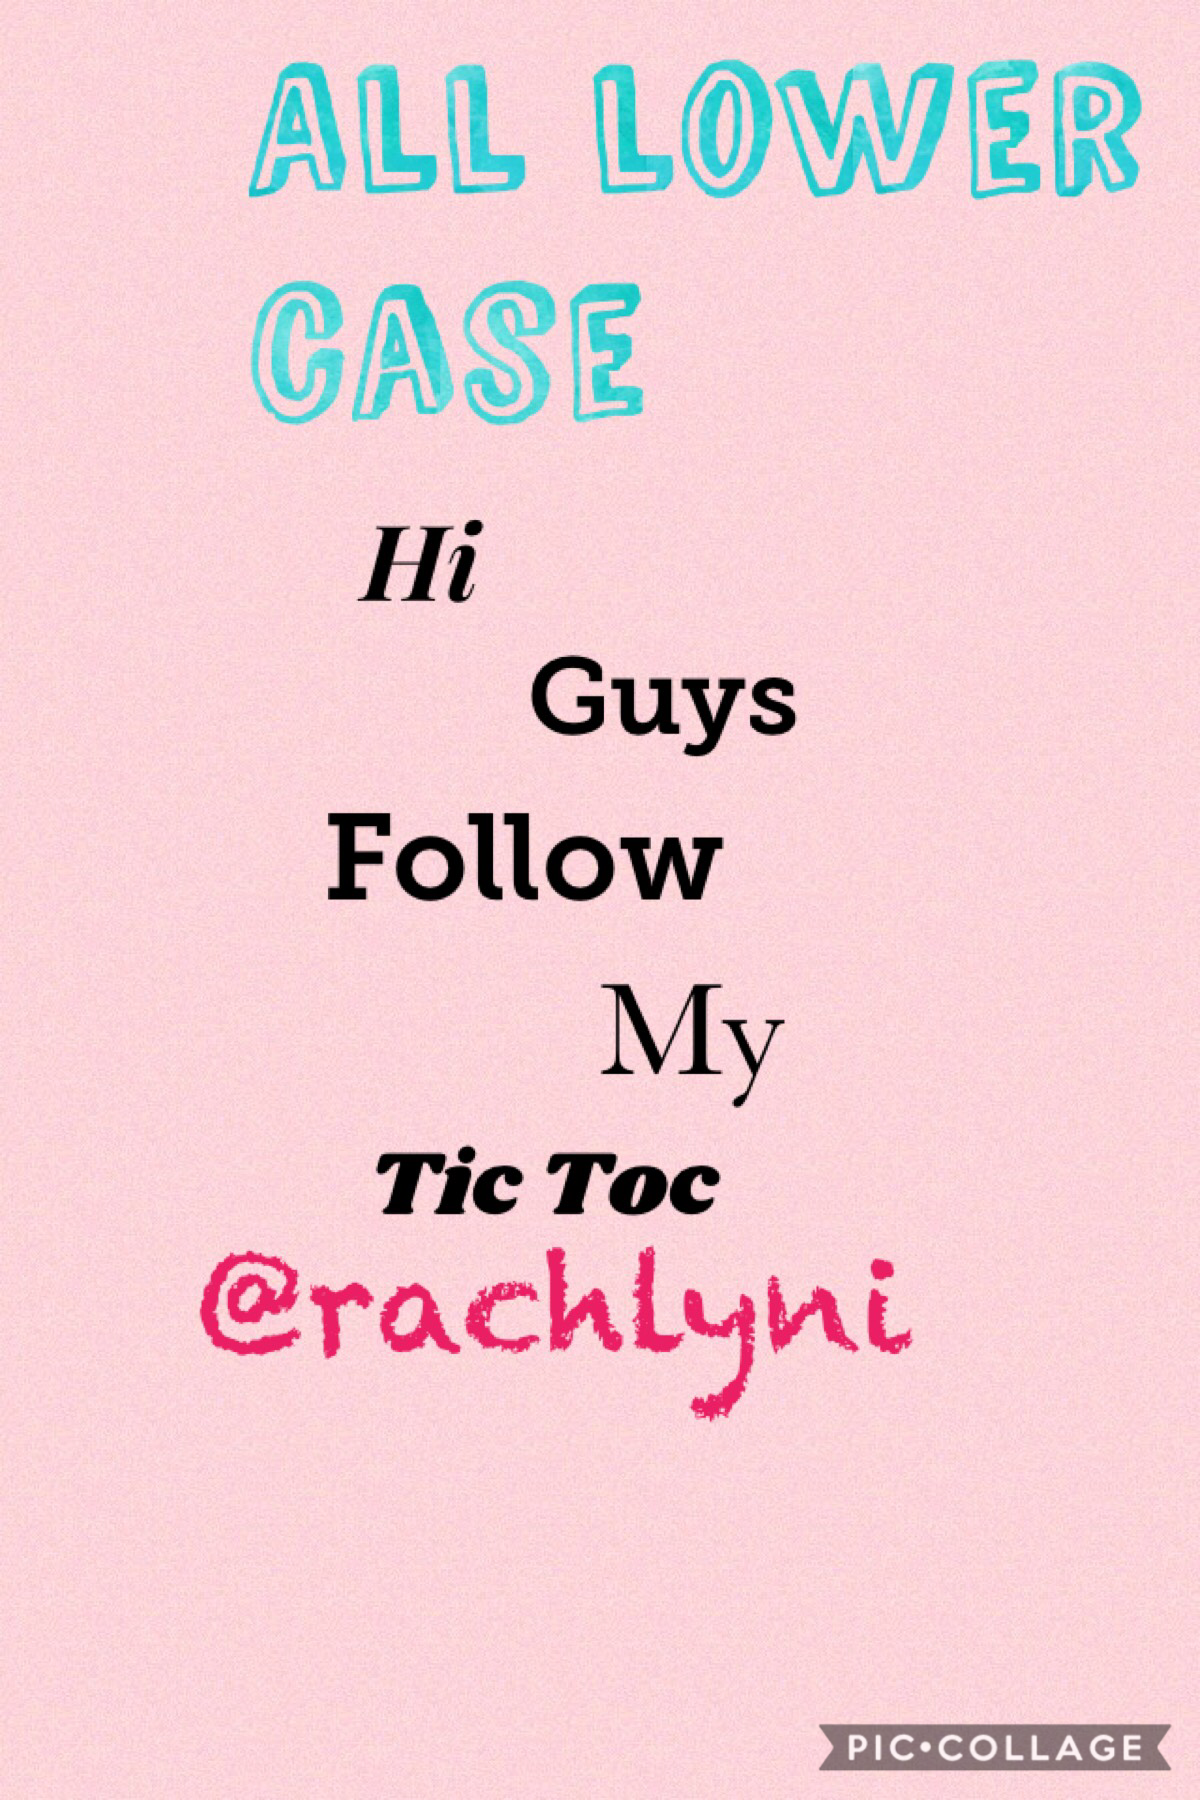 Hi I no I have not posted in awhile sorry but pls follow my tic toc 
@rachlyni